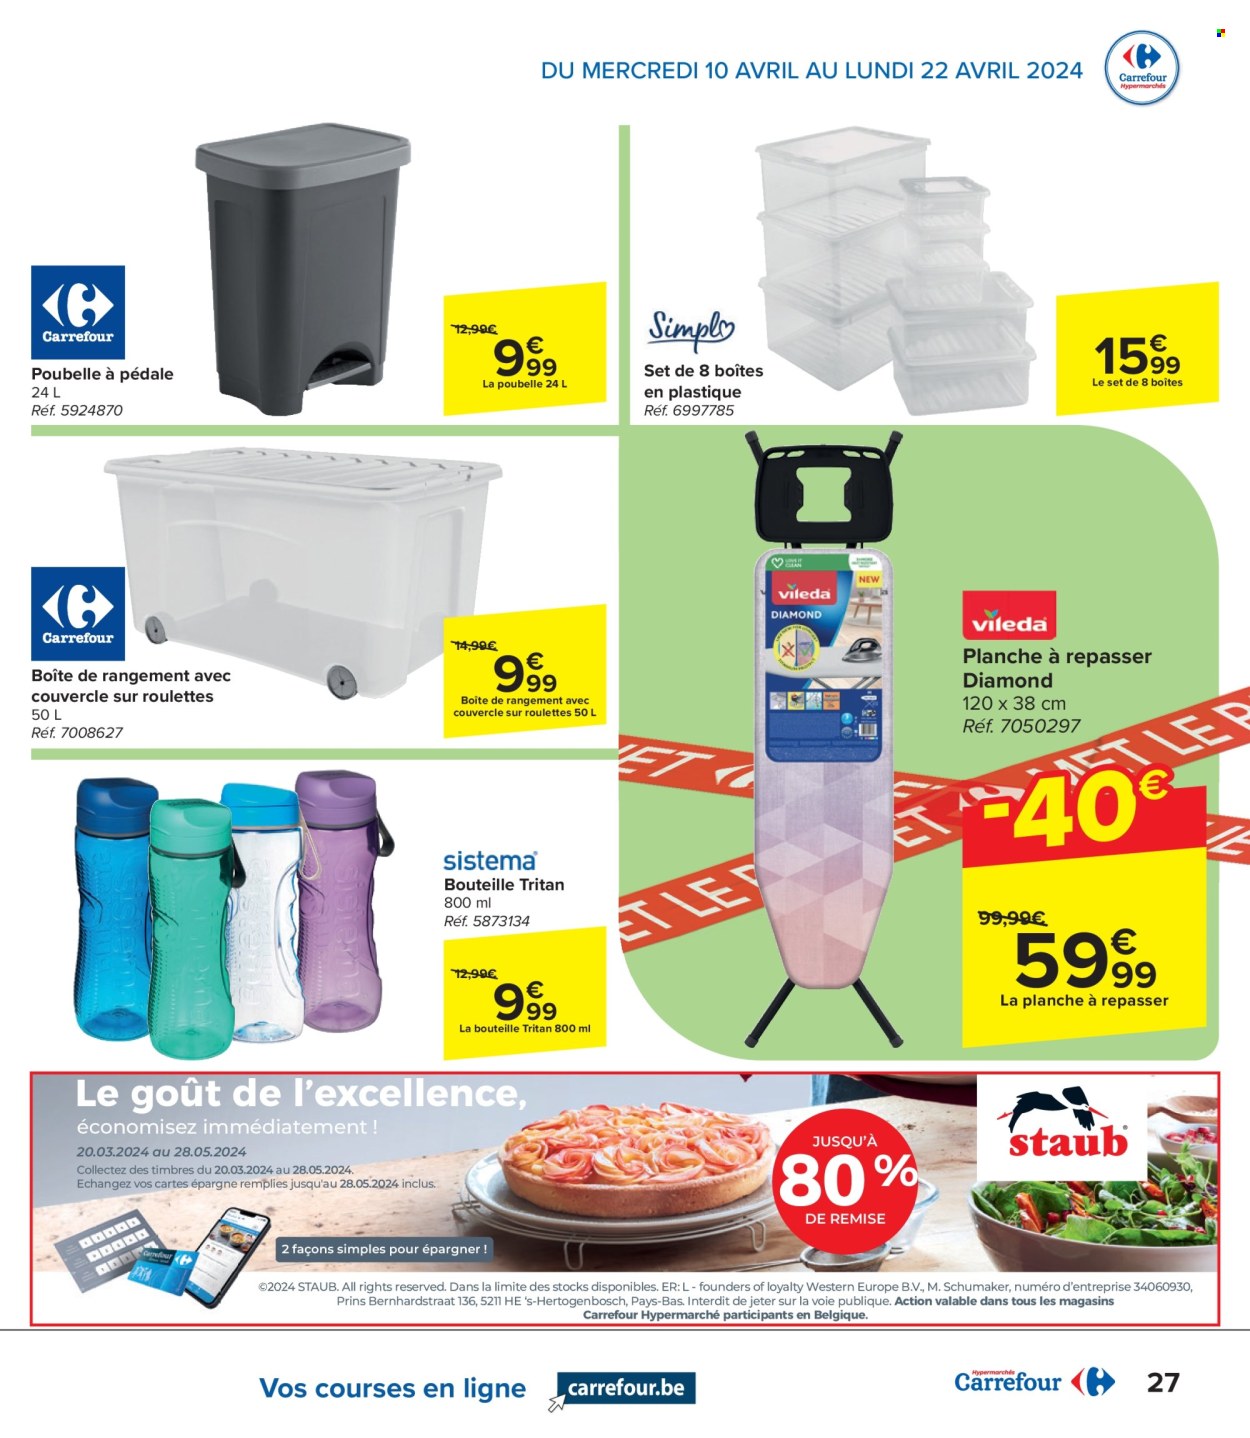 Catalogue Carrefour hypermarkt - 10.4.2024 - 22.4.2024. Page 27.